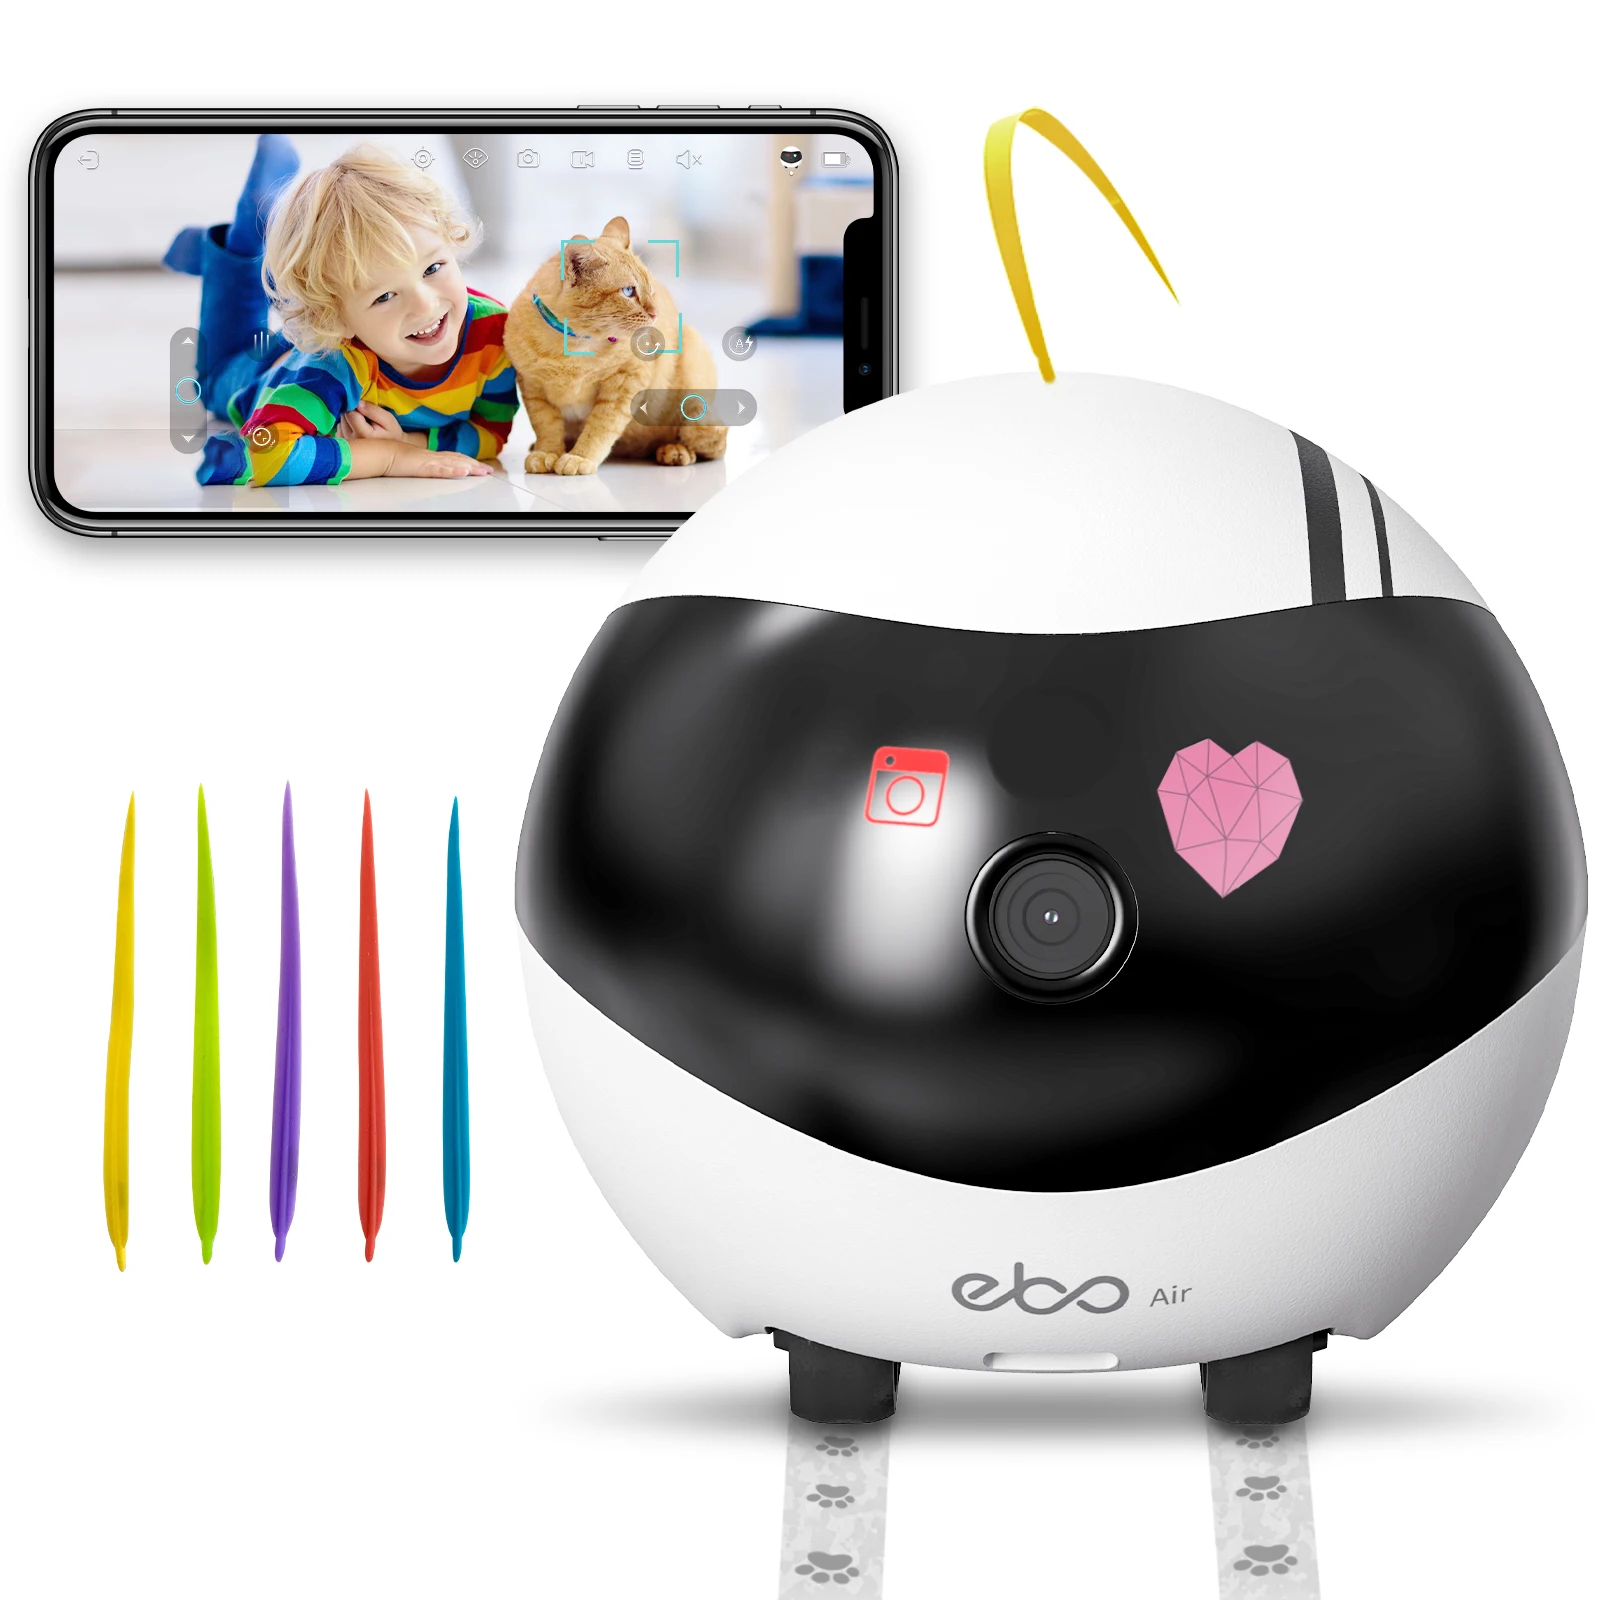 Enabot Security Monitor Home Robot Pet Camera, 2 Way Audio AI Tracking Monitors with E-Pet, Wireless Self-Charging Night Vision